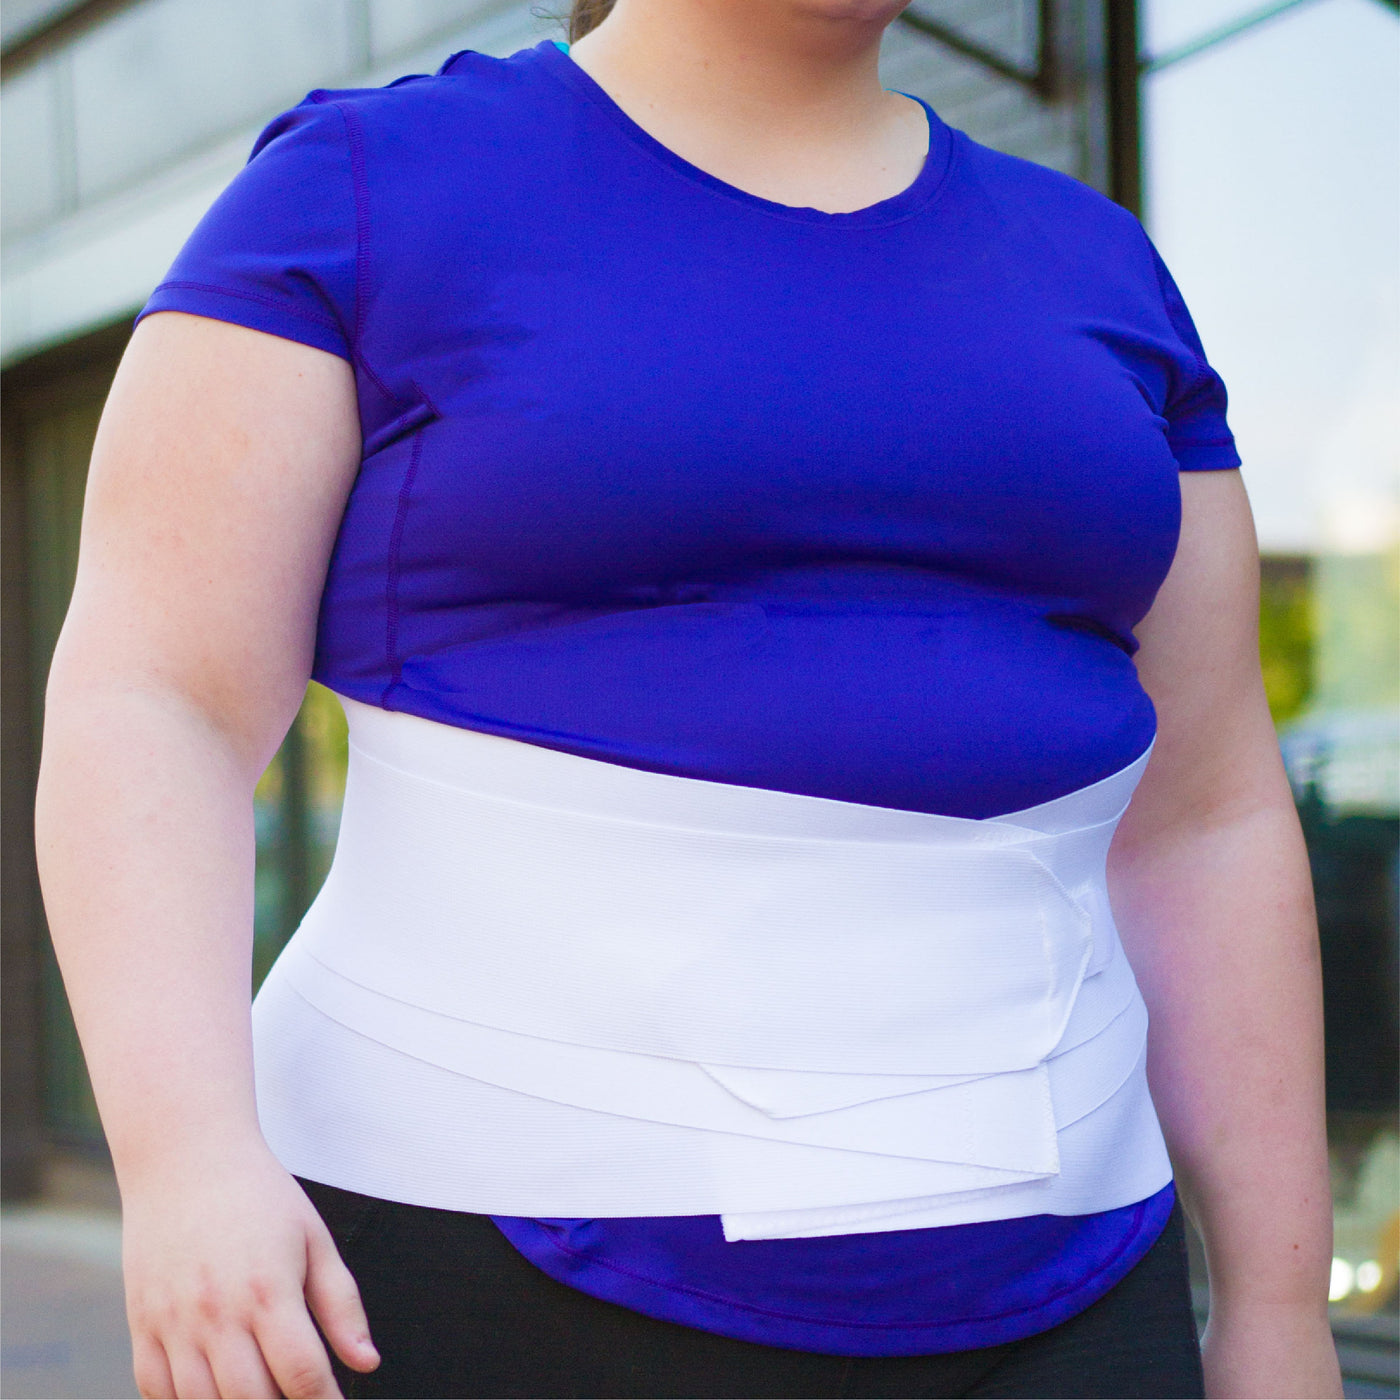 the plus size back brace comes in a while color that looks clean and professional